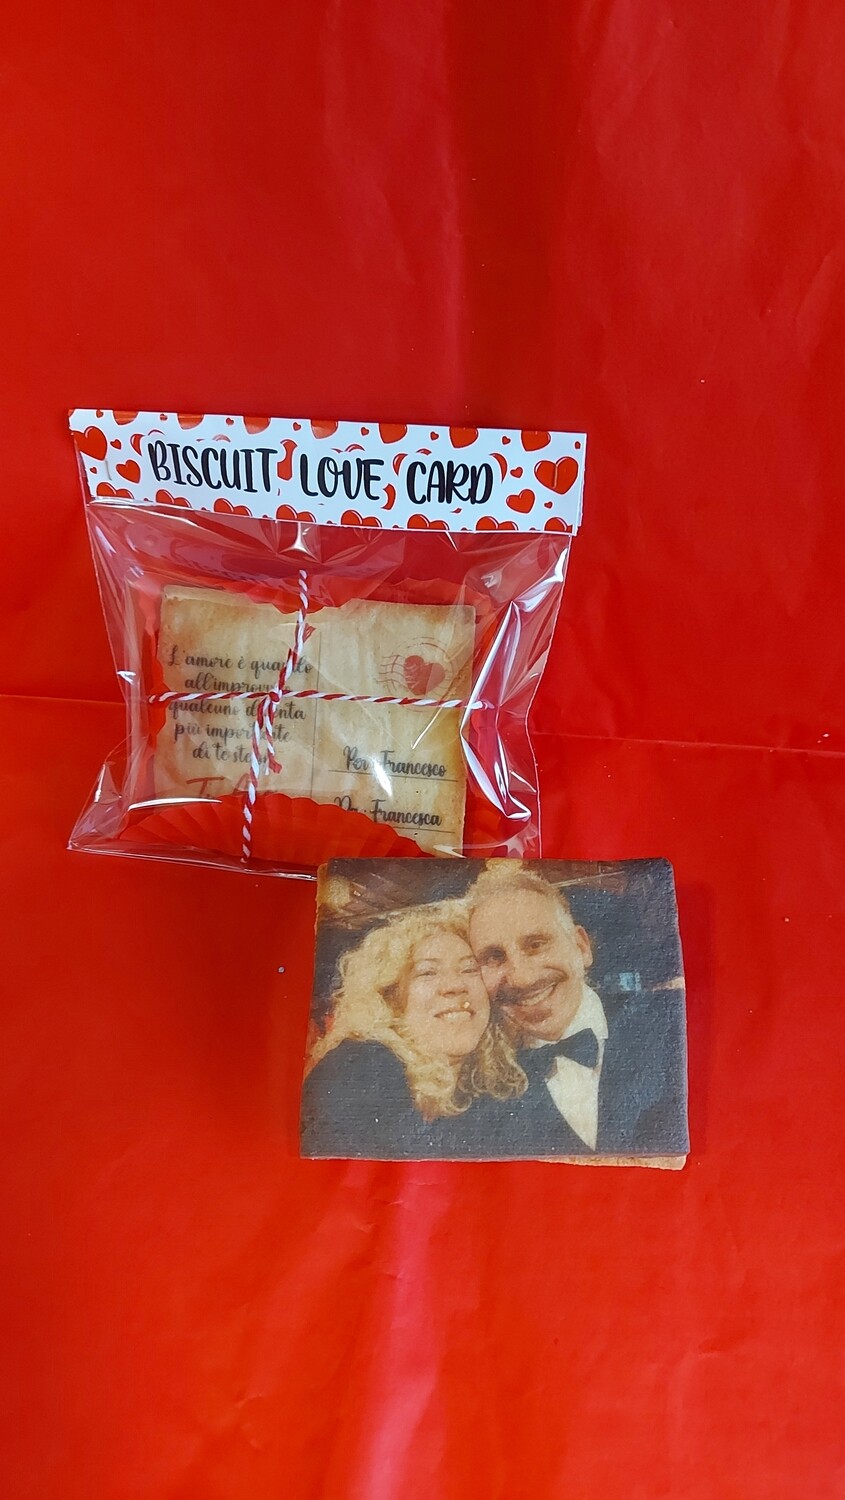 Biscuit LOVE card